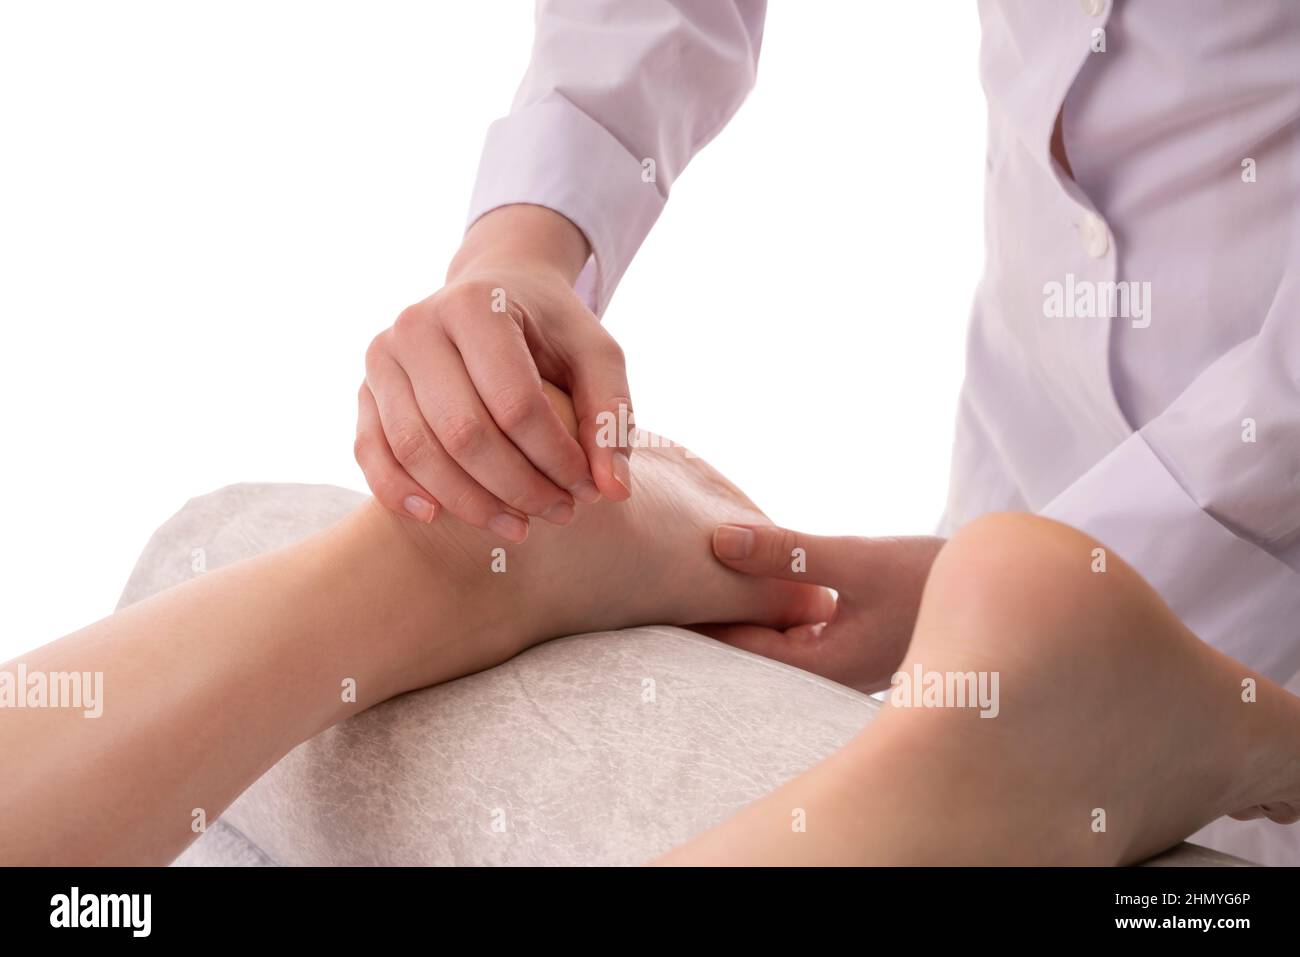 Crop female masseuse doing massage for client Stock Photo